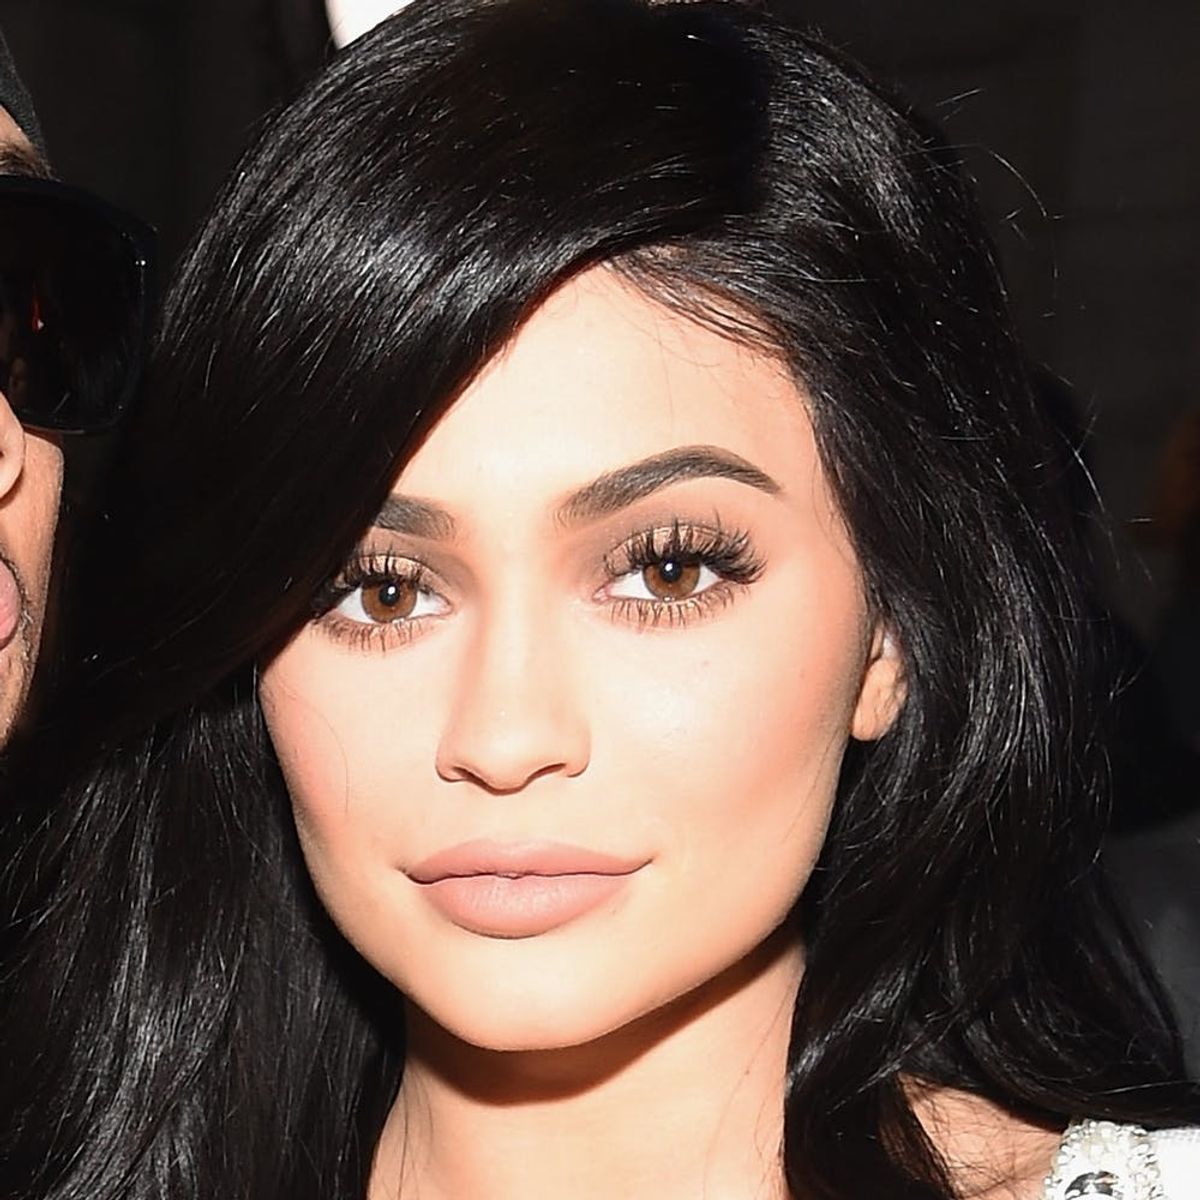 Whoa: Kylie Jenner’s Lip Kits Are Getting a New Velvety Makeover